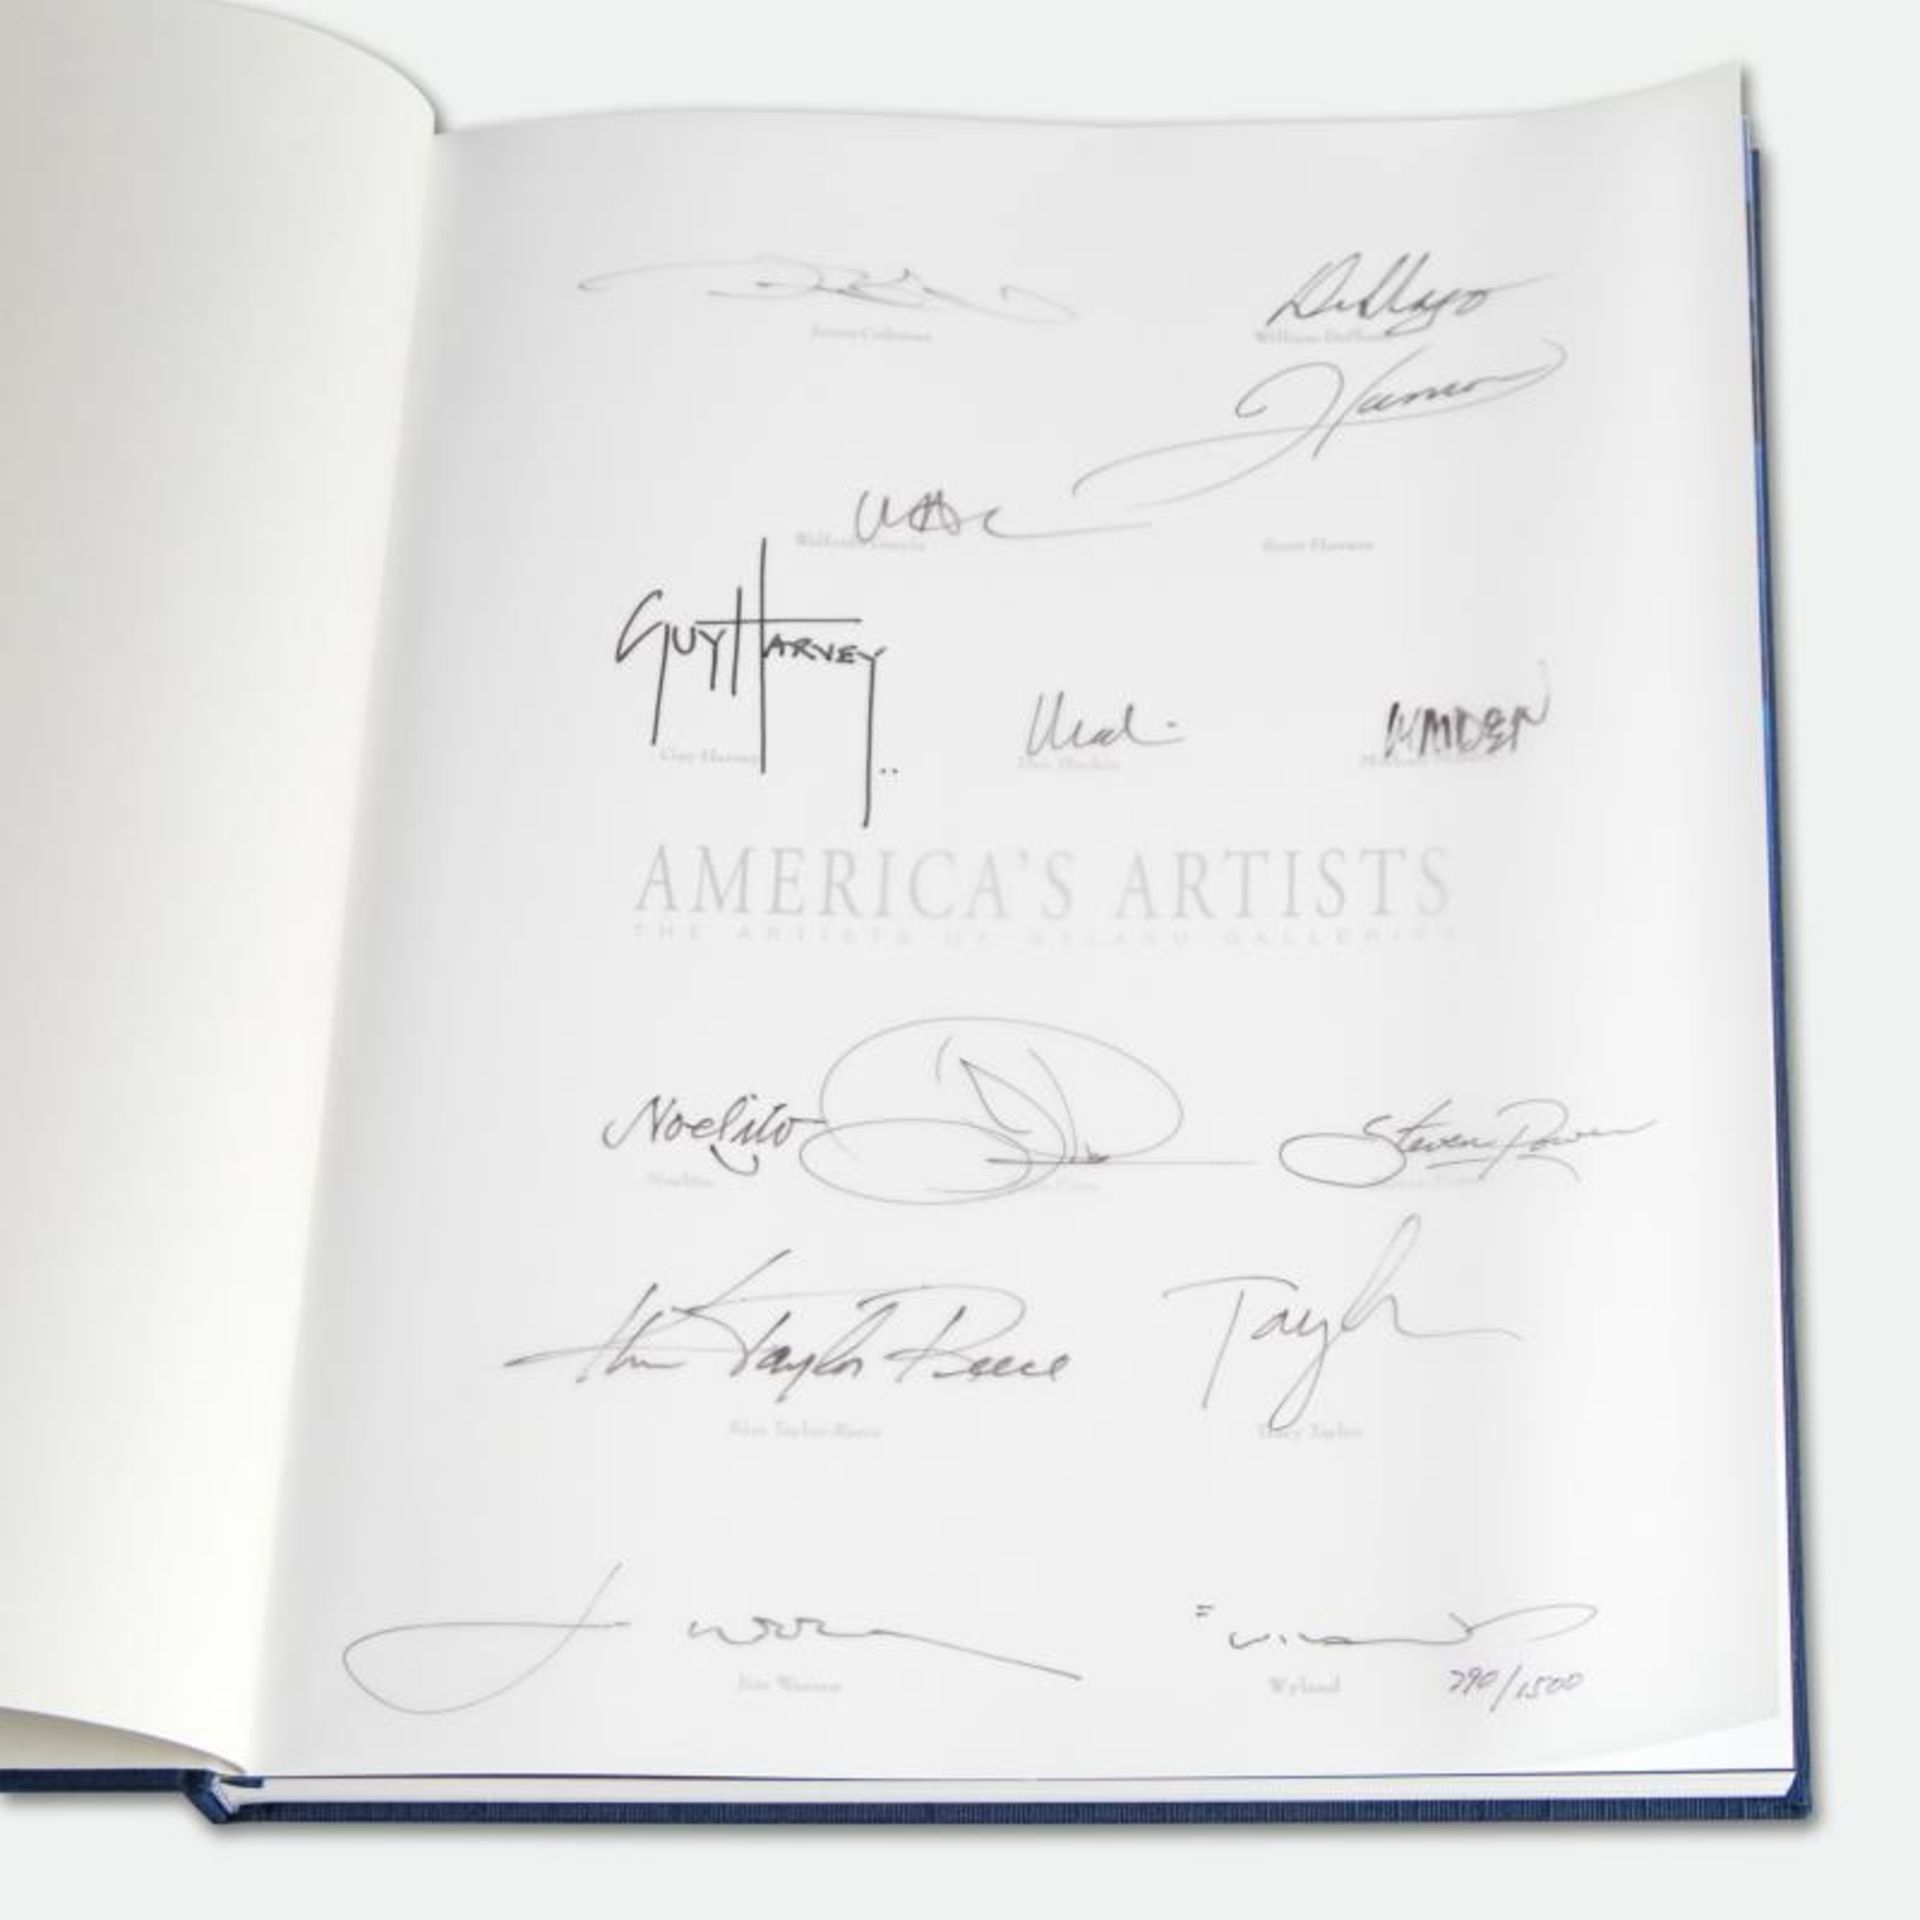 America's Artists by Wyland - Image 3 of 3